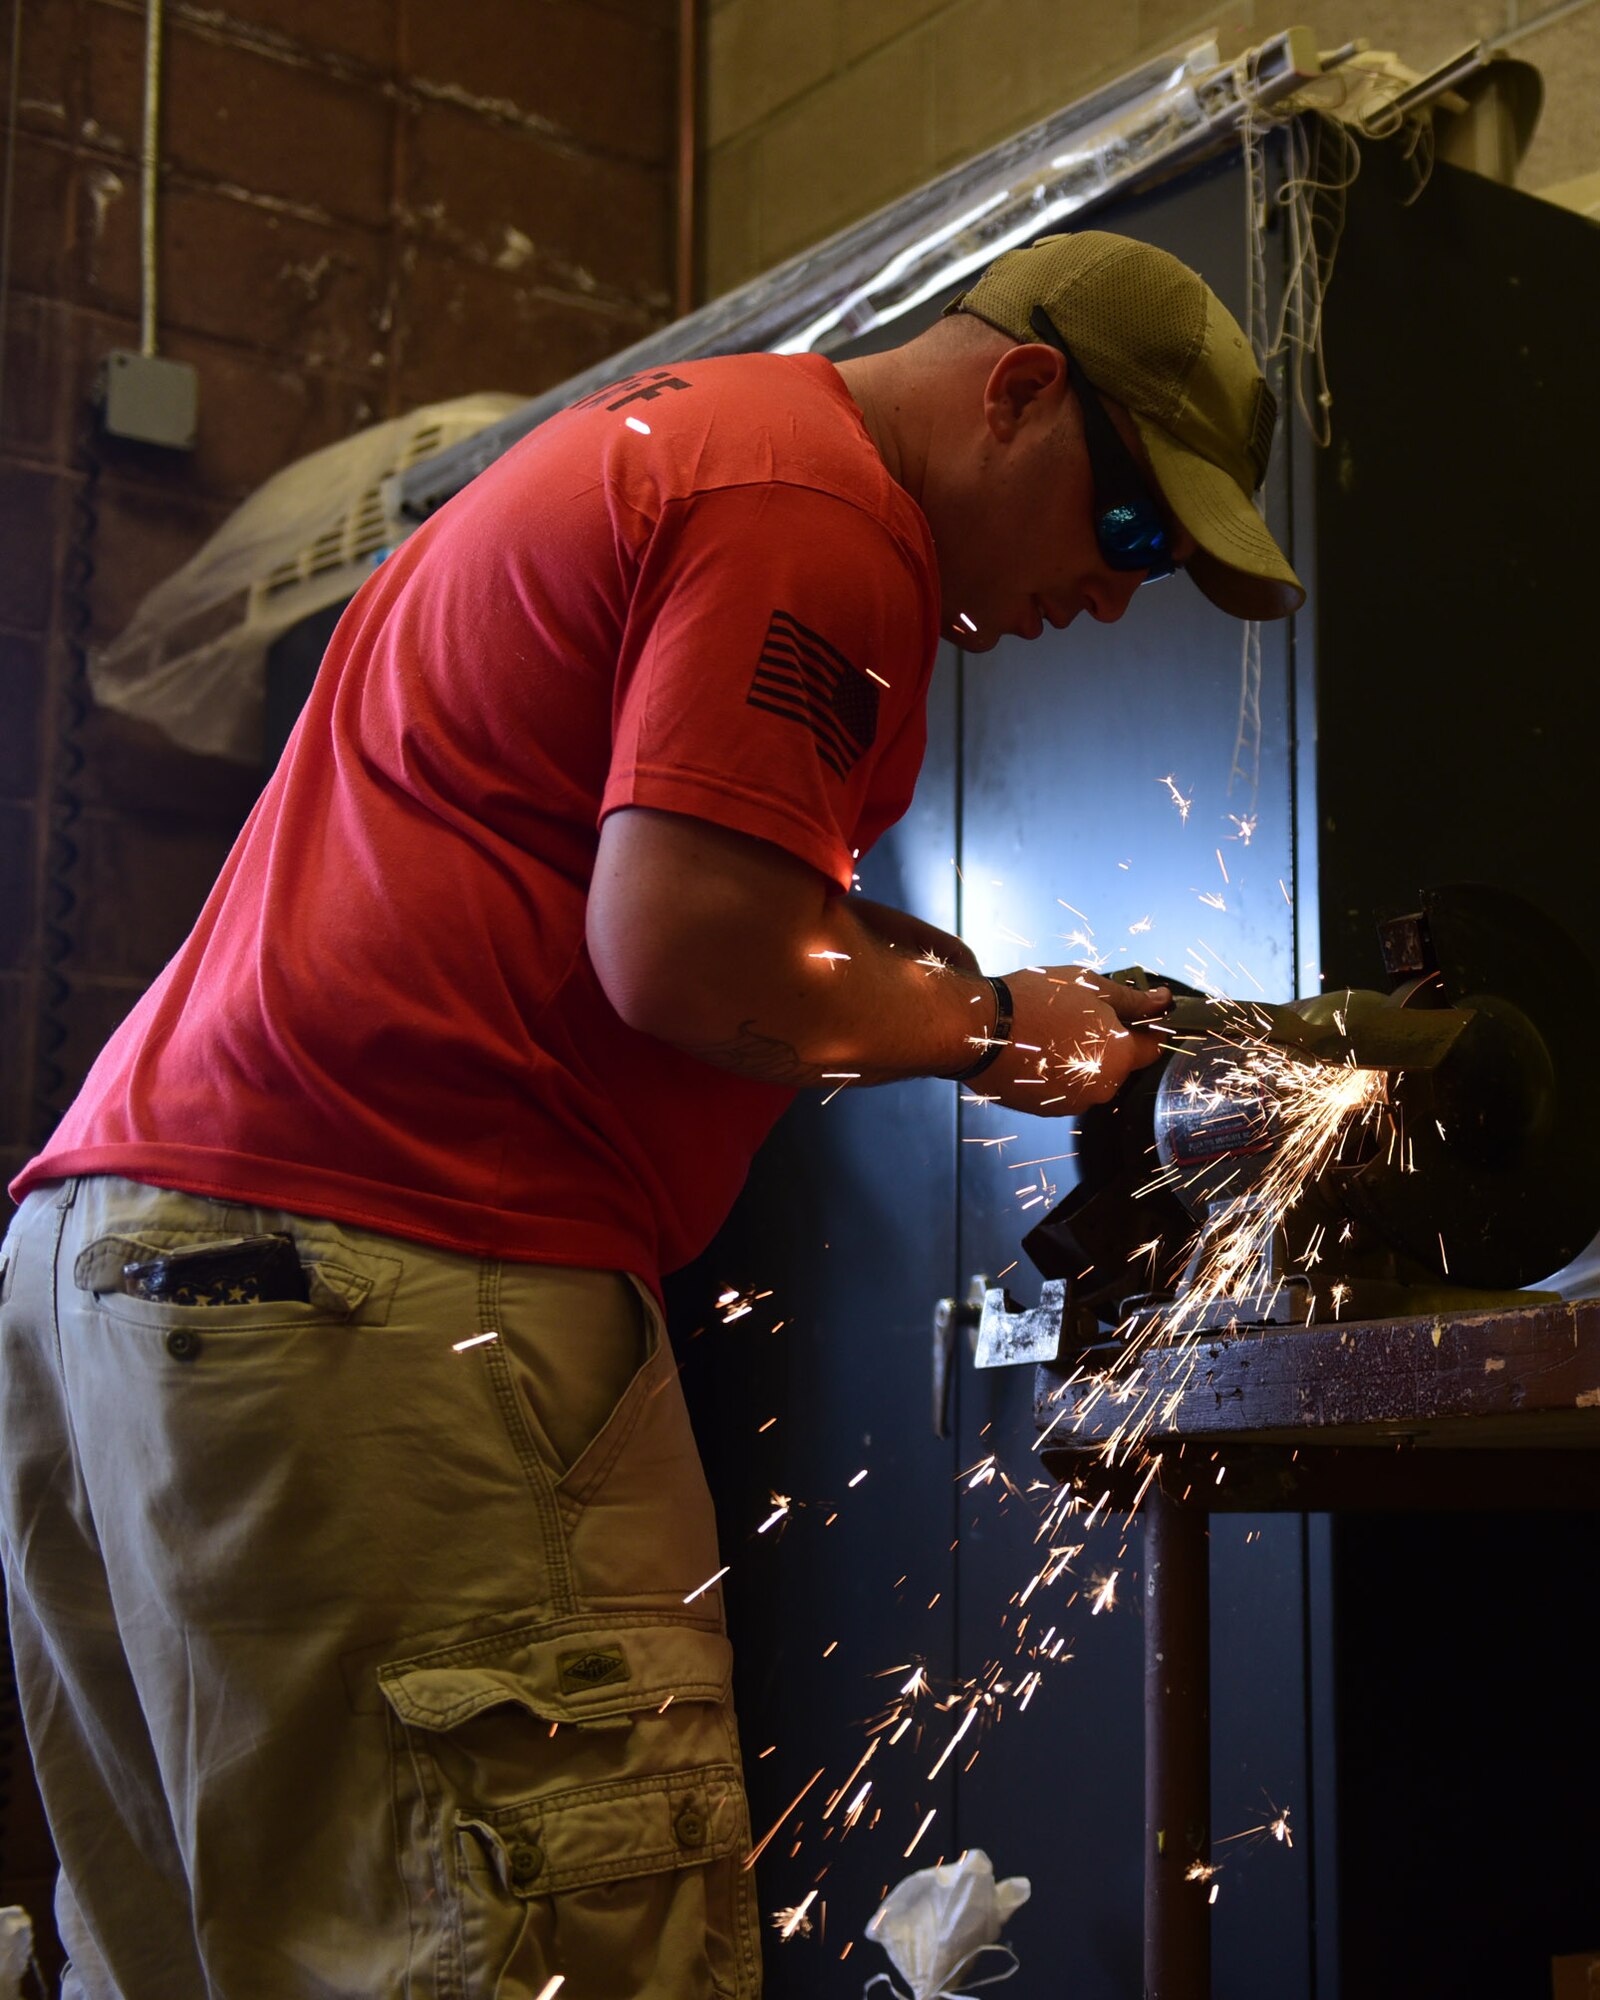 TJ Binder, 28th Force Support Squadron outdoor recreation technician, sharpens a lawnmower blade for a customer at the Outdoor Recreation Center at Ellsworth Air Force Base, S.D., Sept. 11, 2015. Sharpening lawnmower blades is just one of the many services offered by the center, for a full list go to www.ellsworthfss.com. (U.S. Air Force photo by Airman 1st Class James L. Miller/Released)   